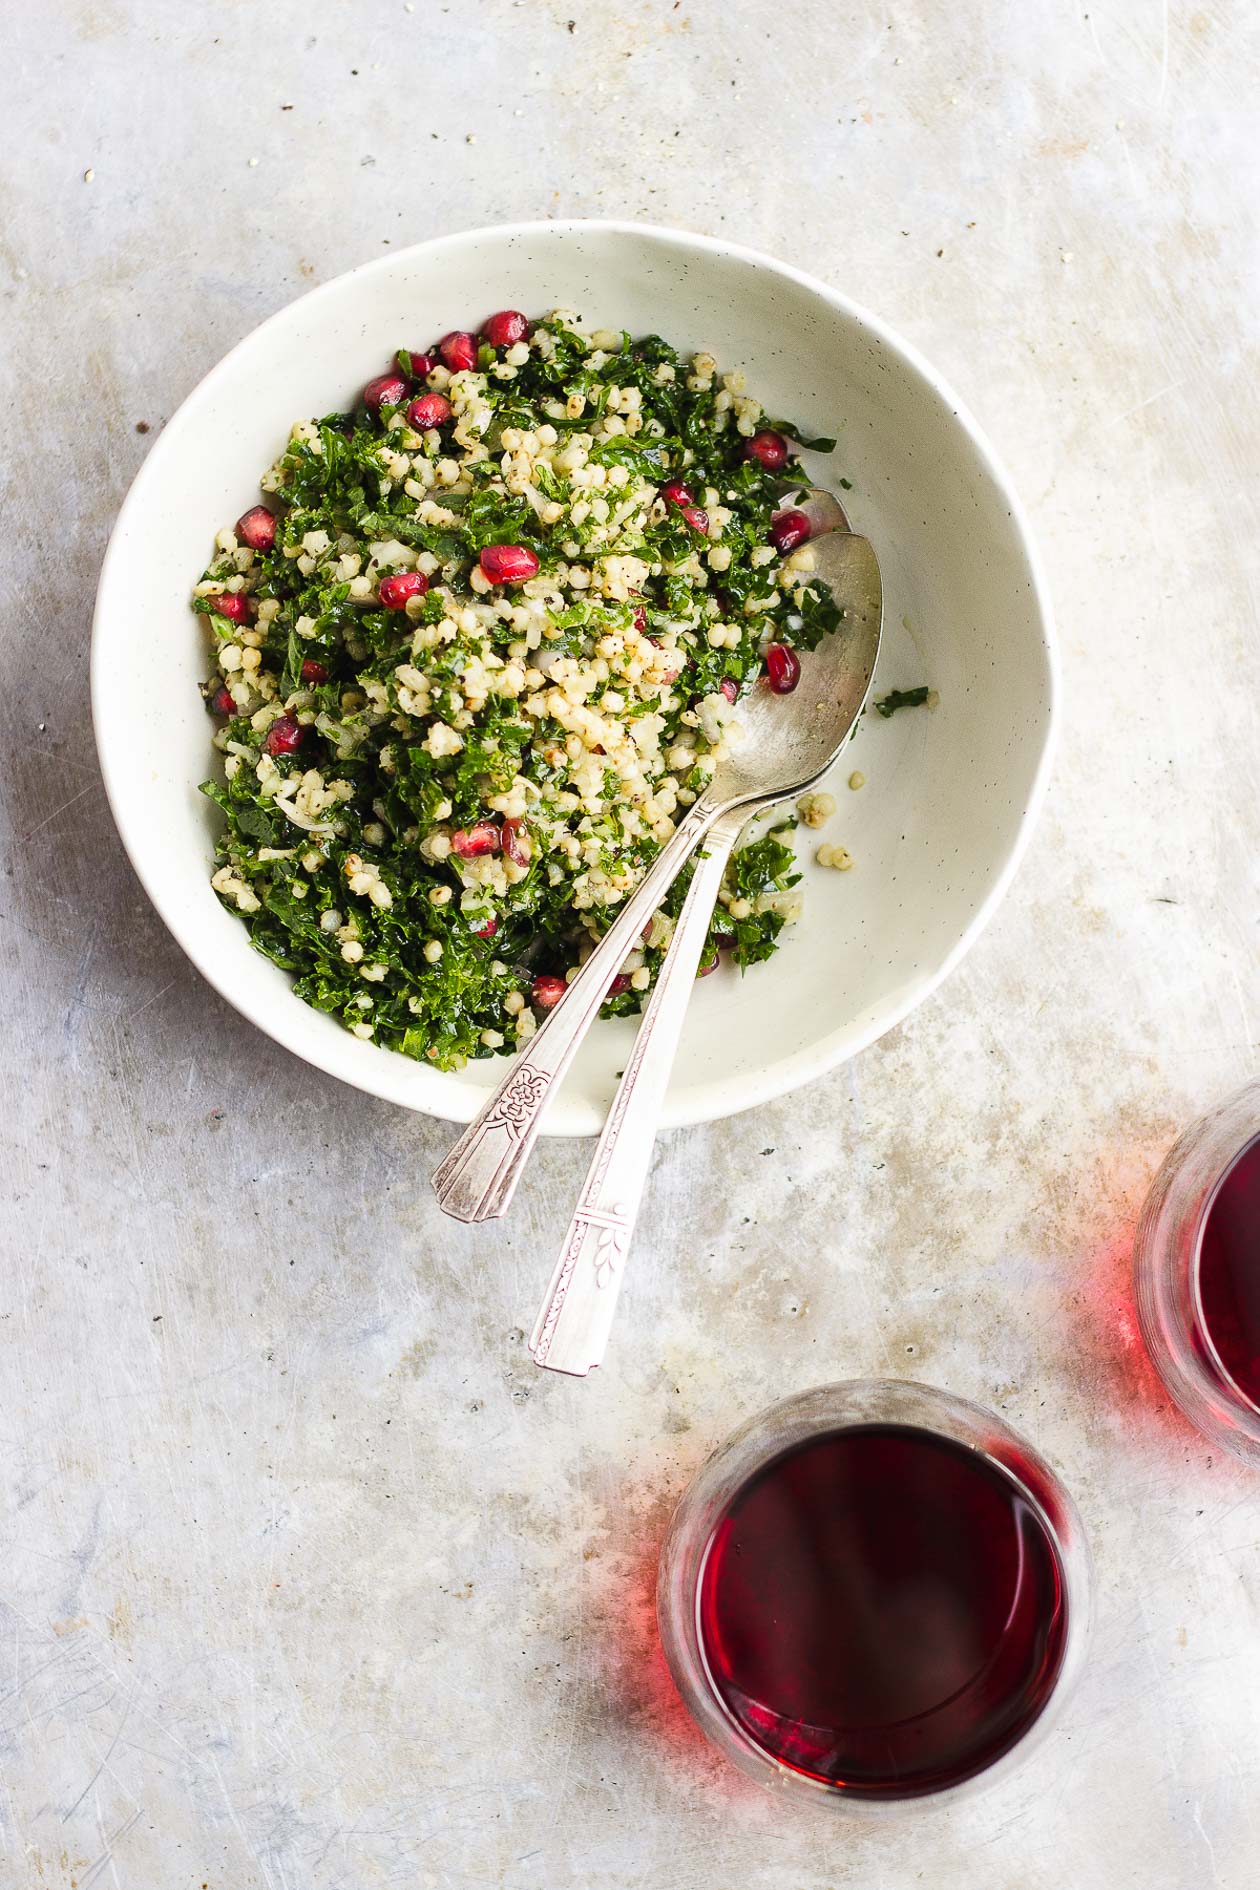 Sorghum Tabbouleh Salad with Clementine Thyme Dressing | Vegan, gluten-free sorghum tabbouleh salad. This winter tabbouleh salad is built with hearty greens, and a punchy citrusy-thyme dressing. 